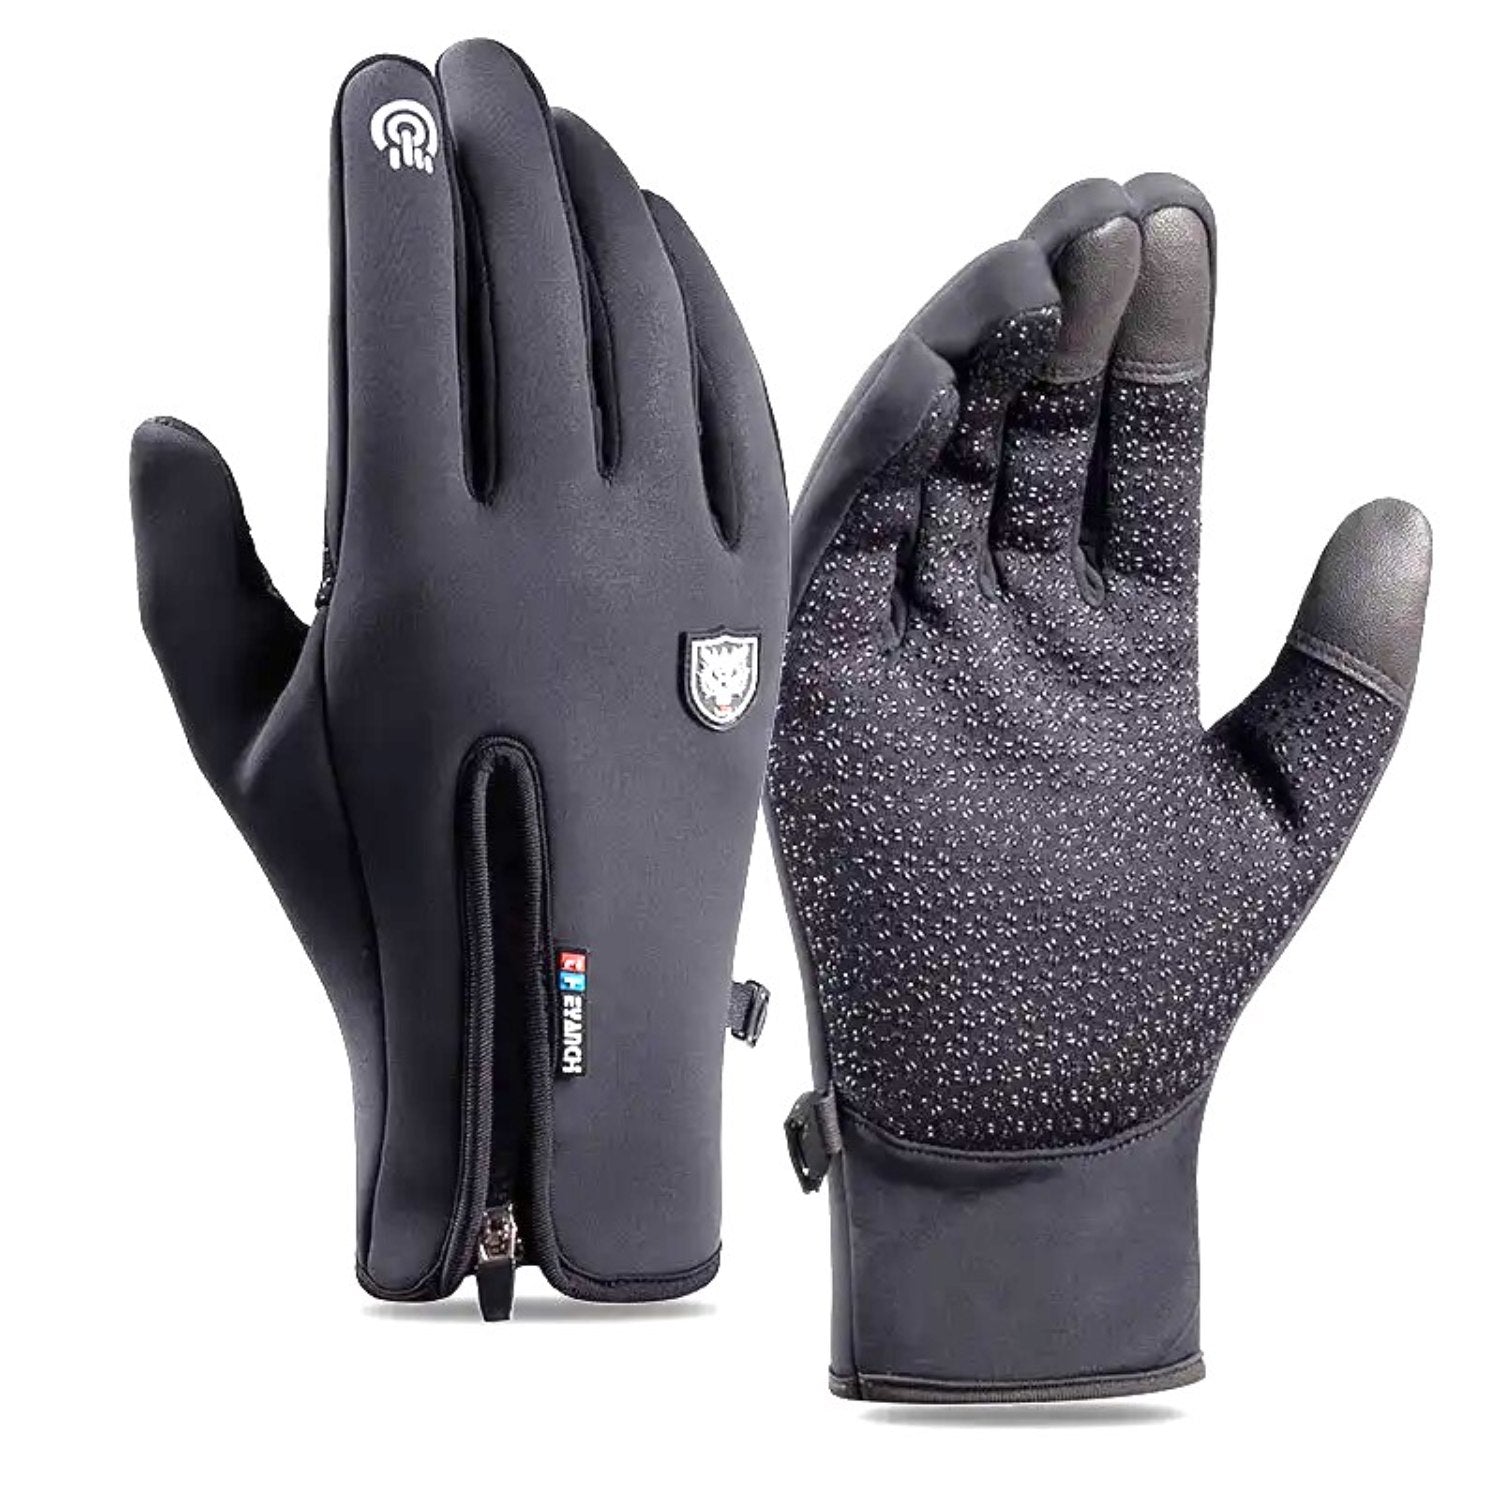 Buy Gokyo Kaza Winter Windproof Gloves with Zipper Black | Cold Weather Gloves at Gokyo Outdoor Clothing & Gear